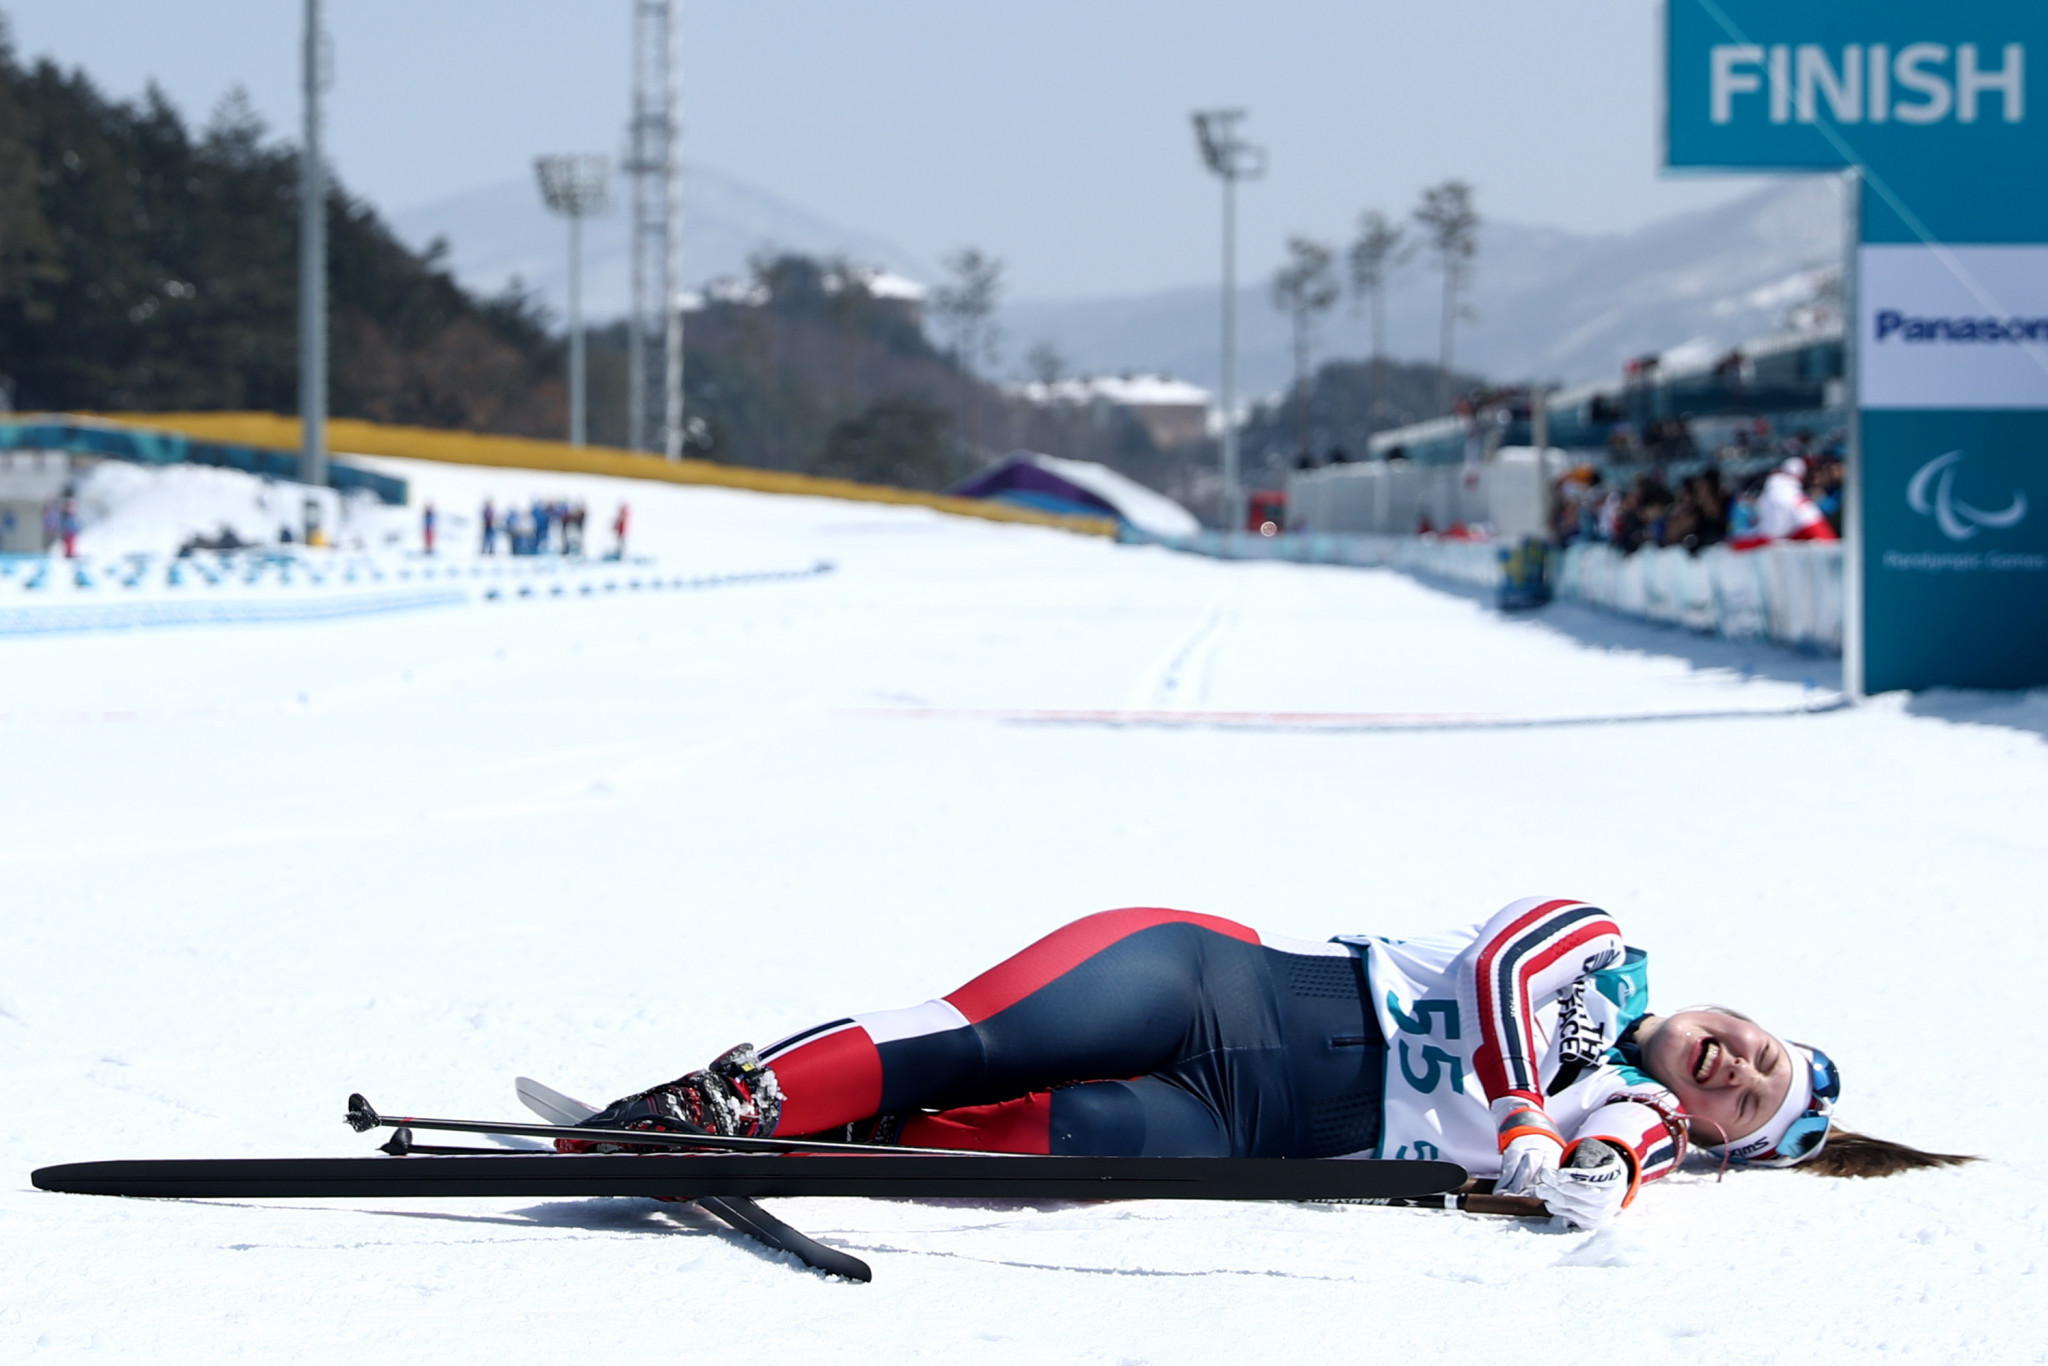 Vilde Nilsen collapses after crossing the finish line in the women's 6km standing biathlon event at the Alpensia Biathlon Centre ©Getty Images